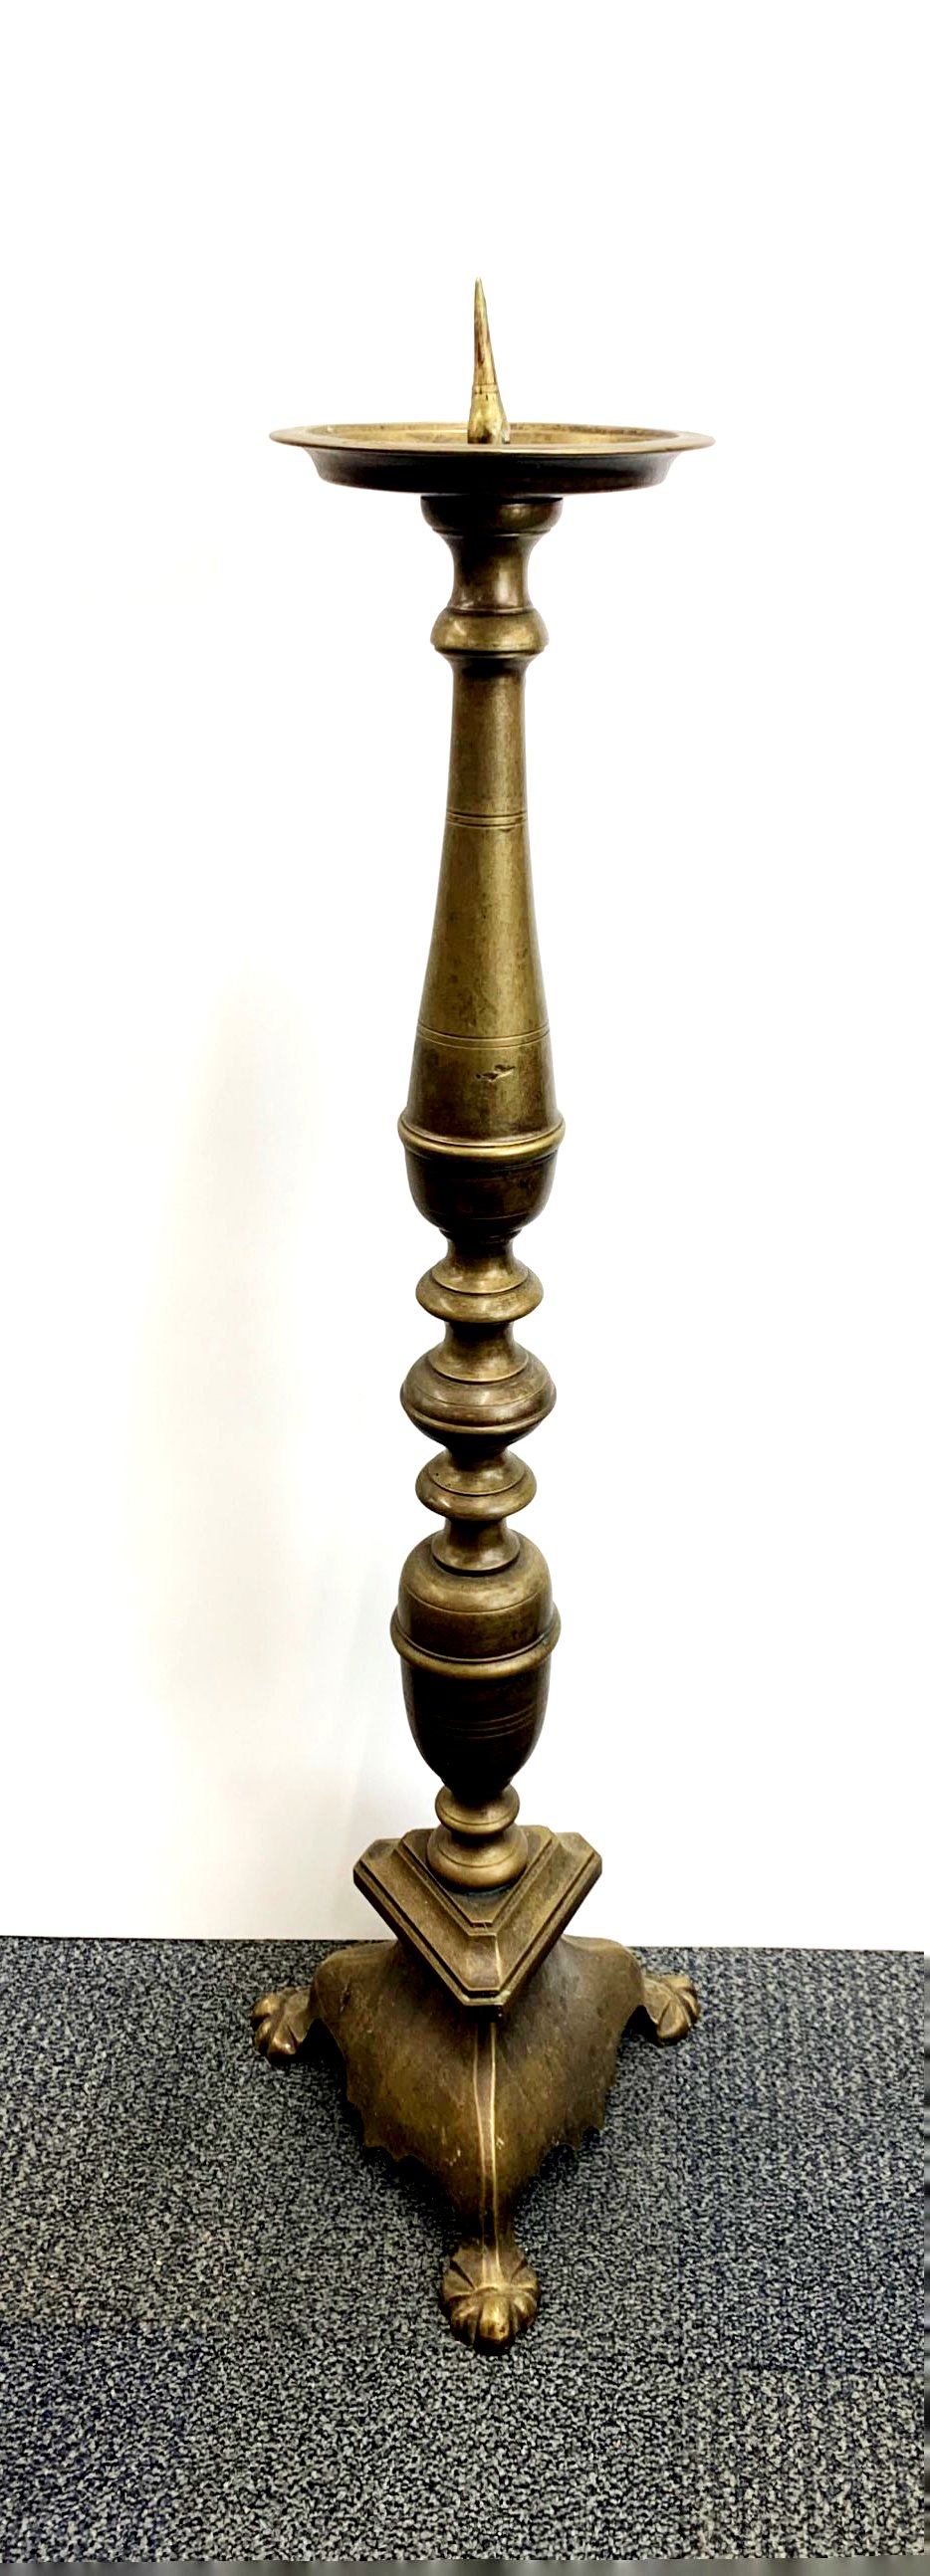 A large 19th century church brass pricket candlestick, H. 106cm. - Image 2 of 3